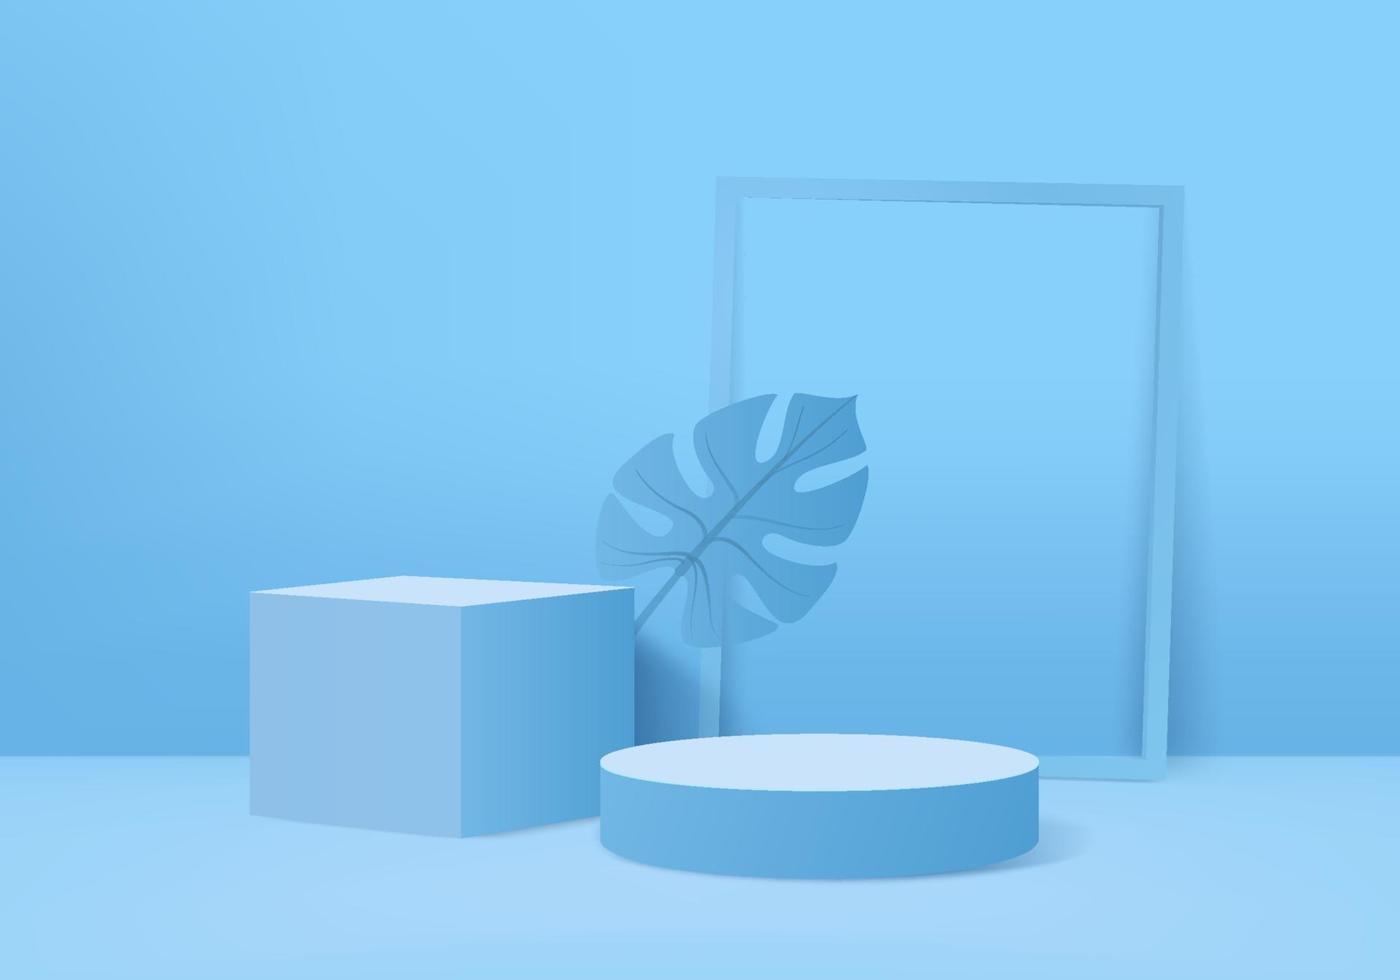 3d background products display podium scene with green leaf geometric platform. background vector 3d render with podium. stand to show cosmetic products. Stage showcase on pedestal display blue studio